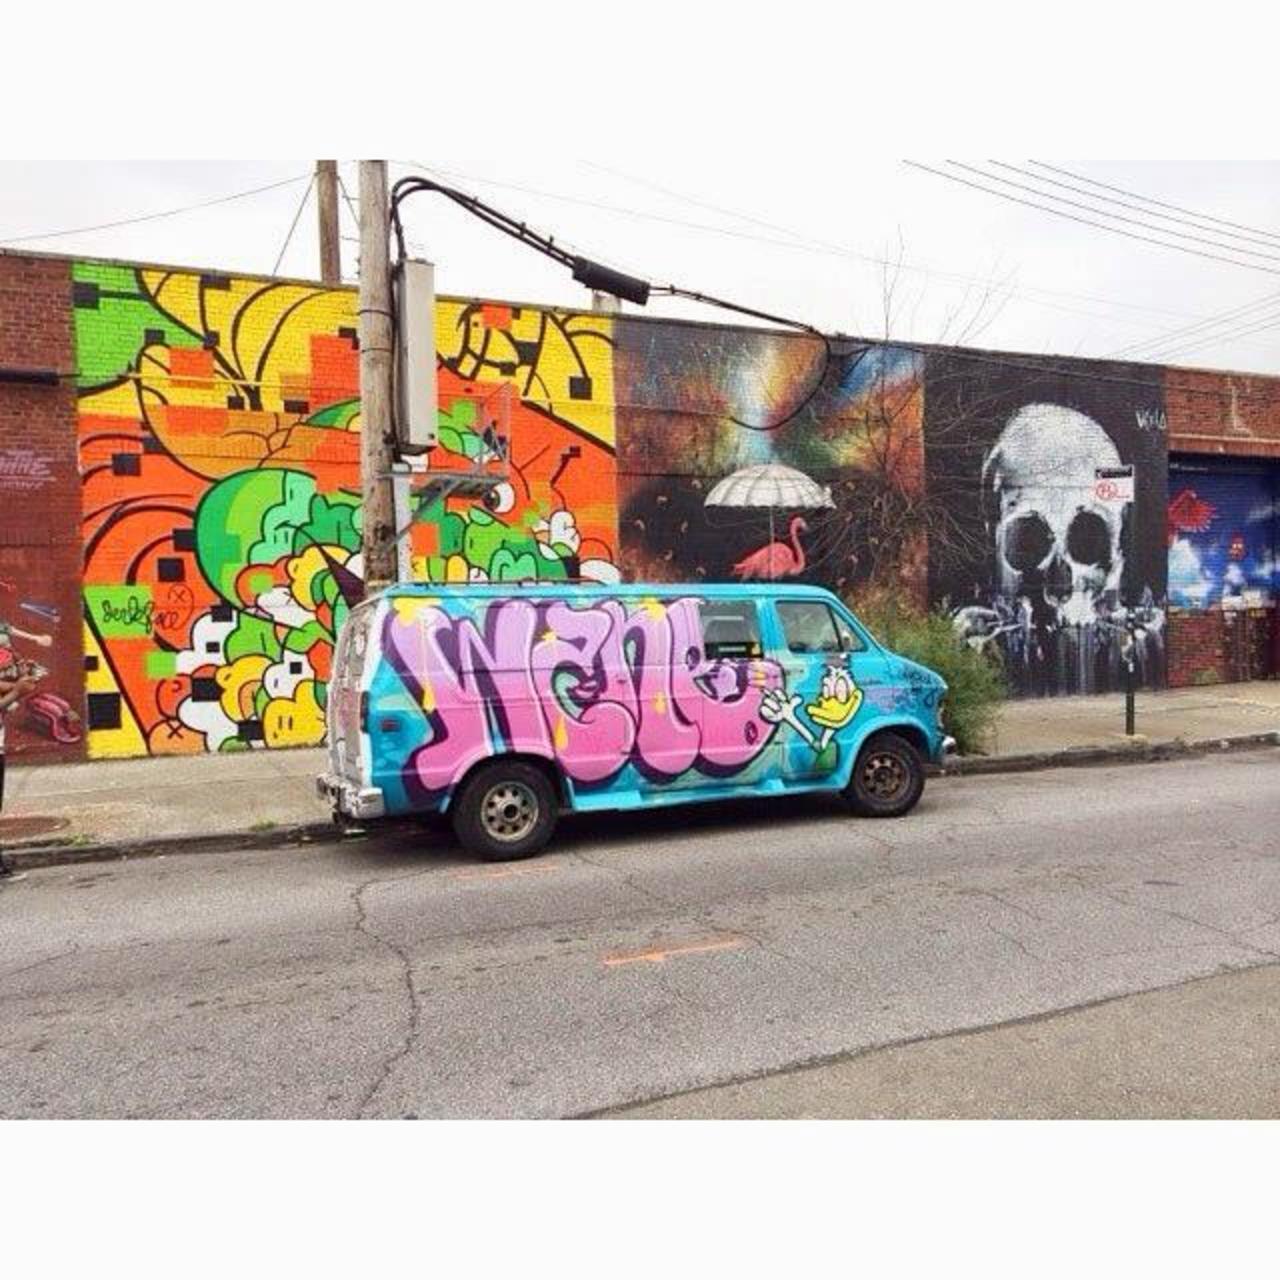 I saw this van in #brooklyn . Does anyone know of the #artist ? #streetart #graffiti https://t.co/rEGsNieCZ0